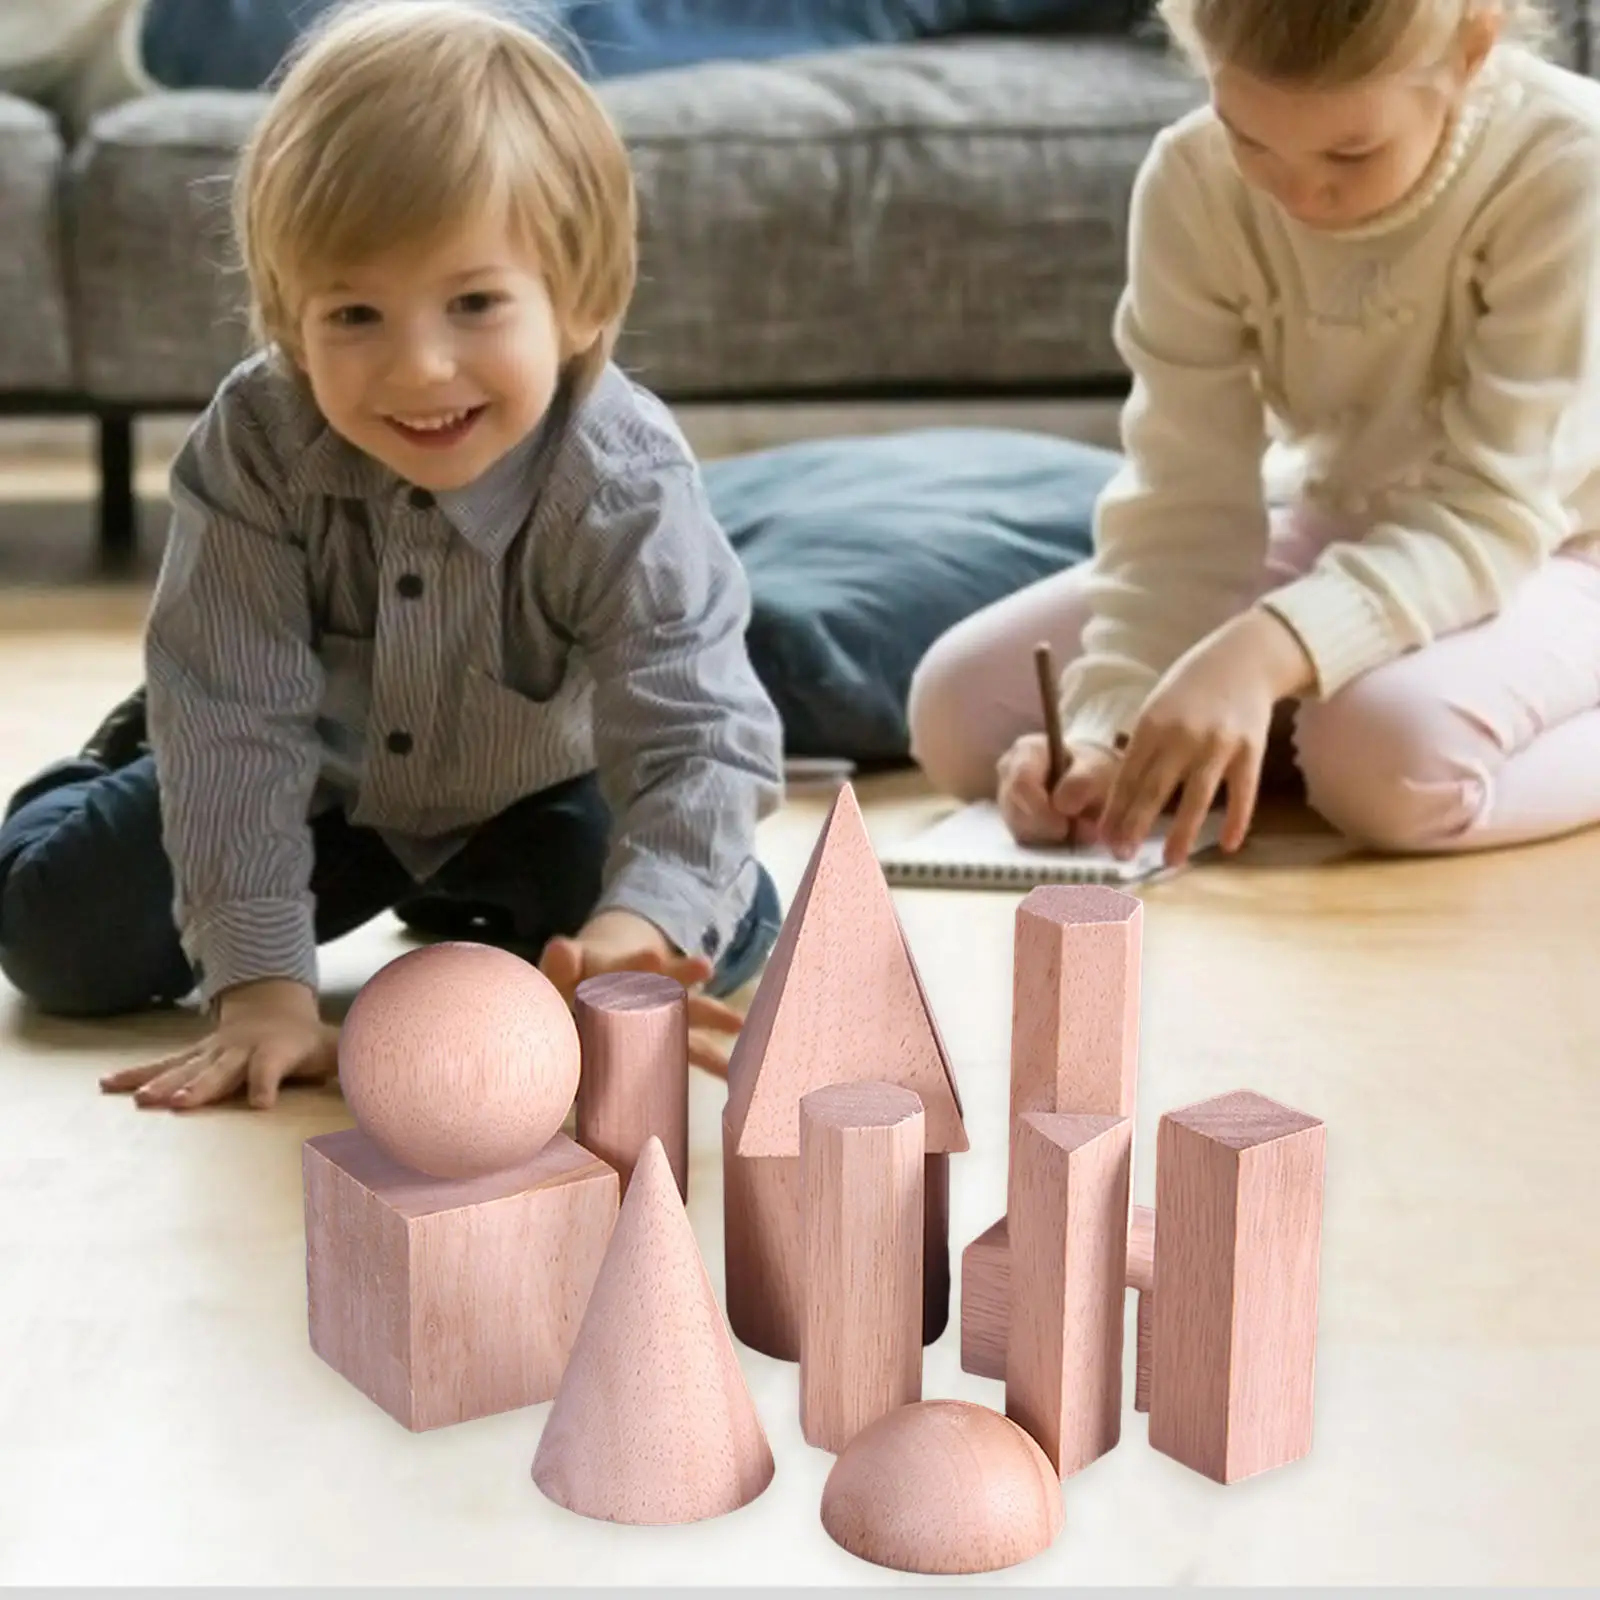 12pcs Geometric Solids Shapes Construction Learning Toys for Toddler Kids